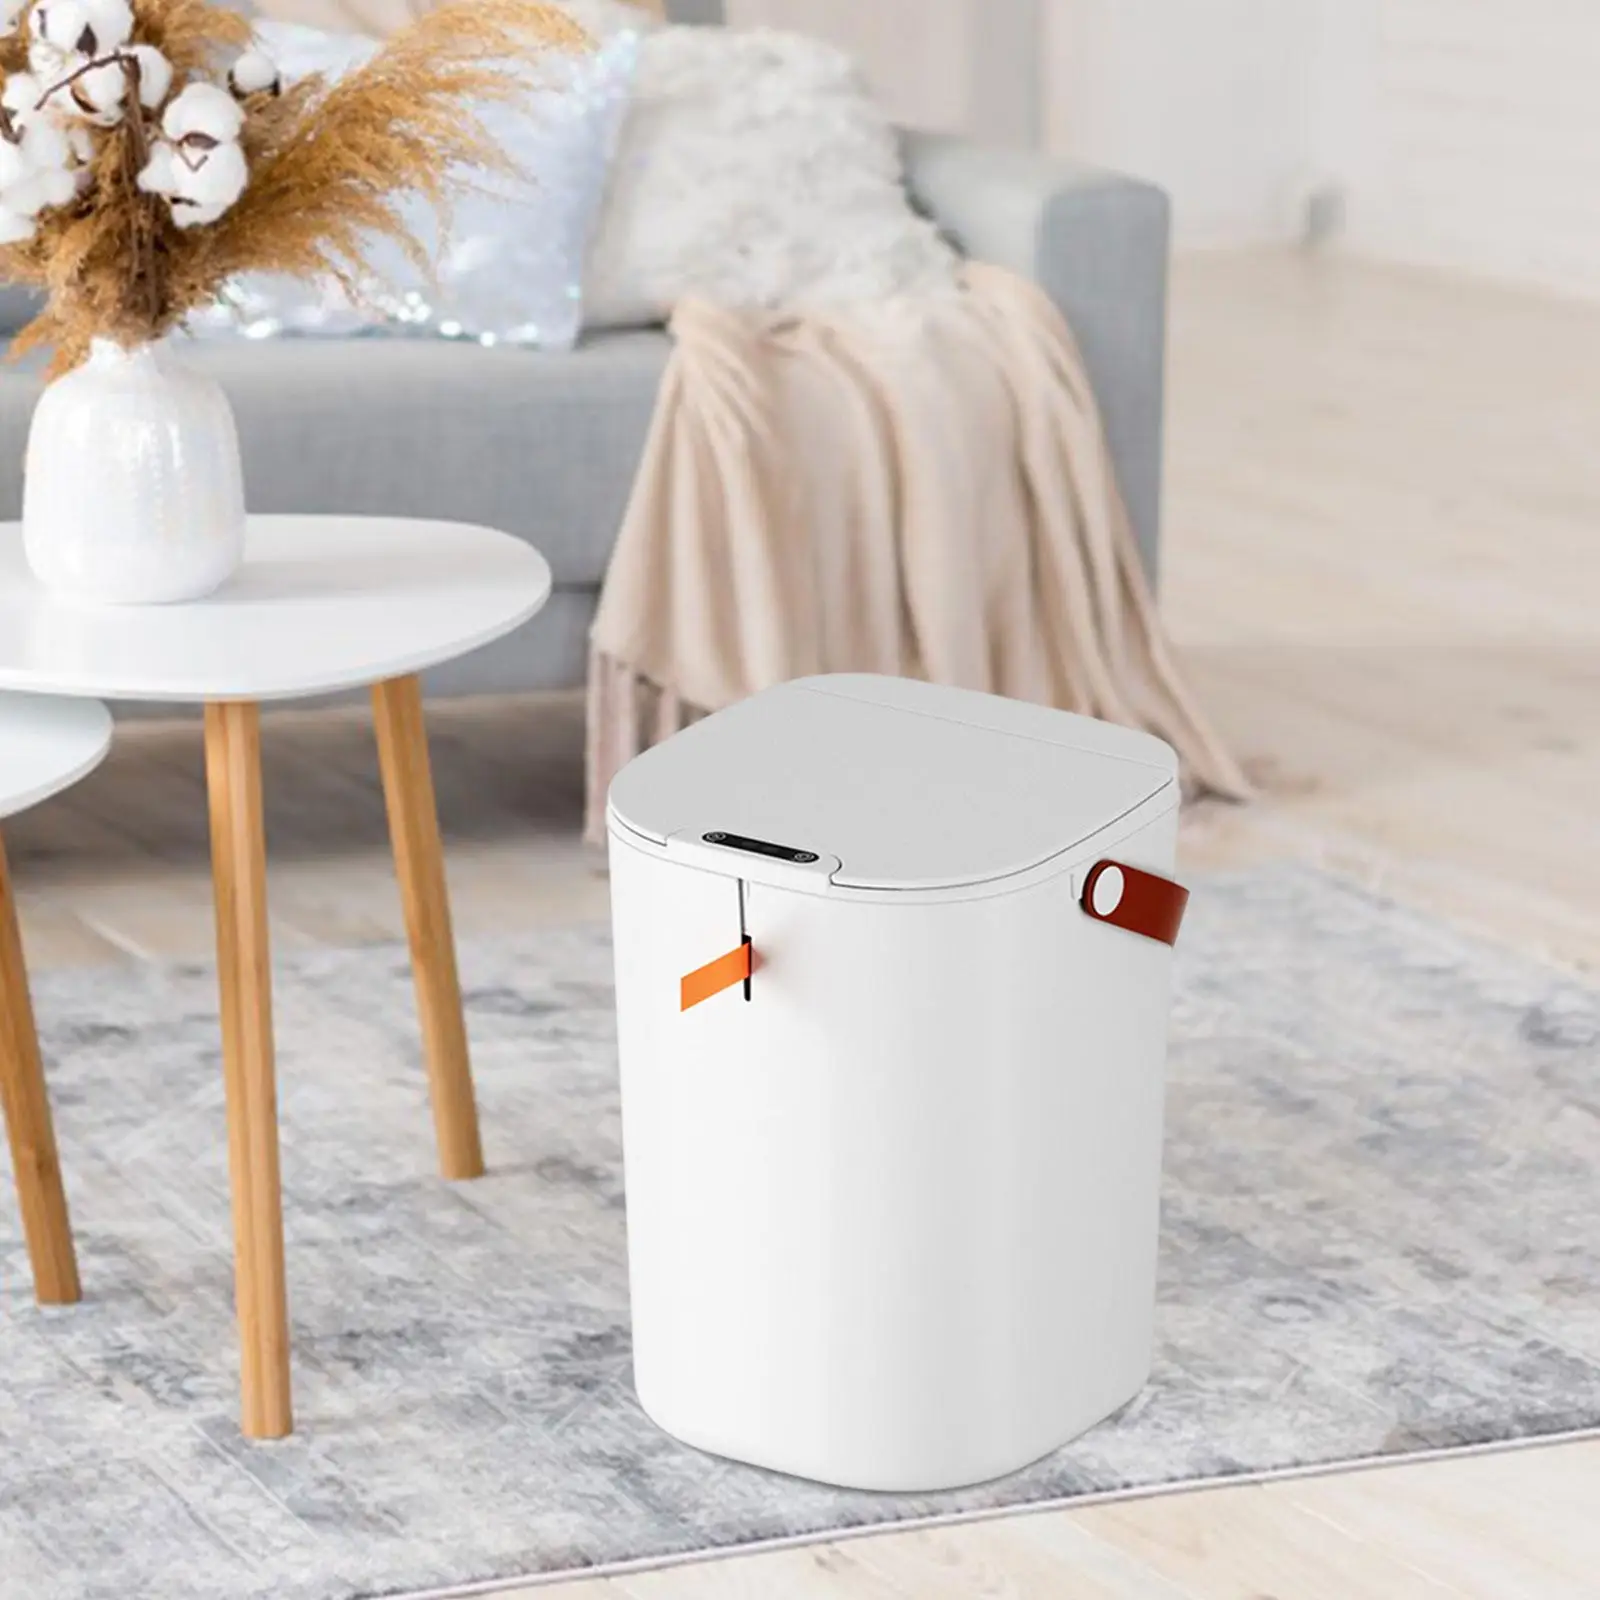 https://ae01.alicdn.com/kf/S27625d5464ad4a2fbae6a3638ed23969V/Smart-Trash-Can-20L-Large-Capacity-Waterproof-Touchless-Trash-Can-Garbage-Can-for-Bathroom-Office-Laundry.jpg